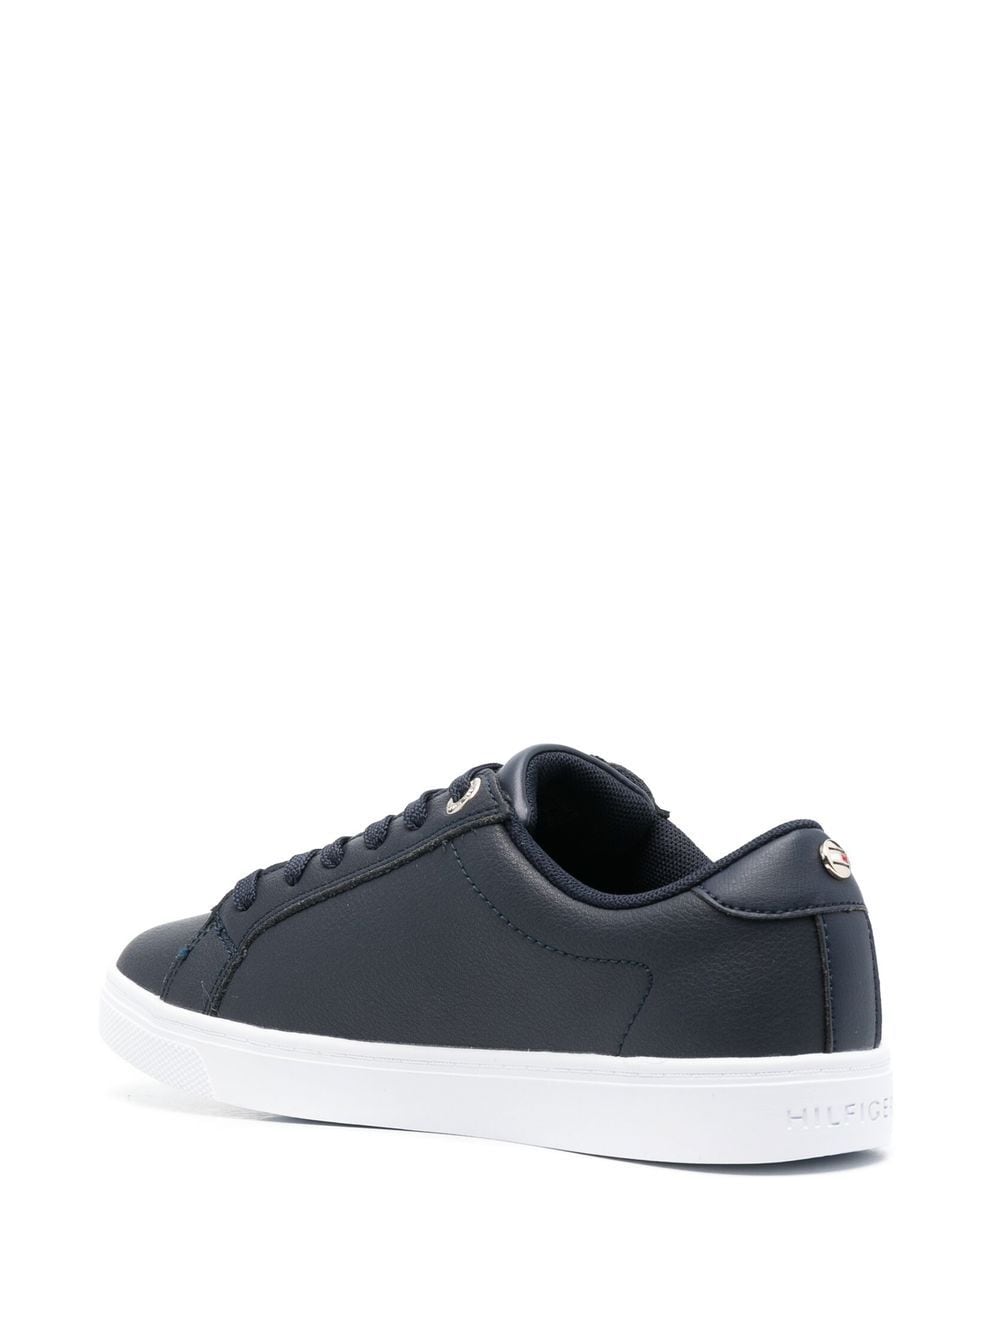 Essential - Tommy lace-up Hilfiger Sneakers Stripes Farfetch